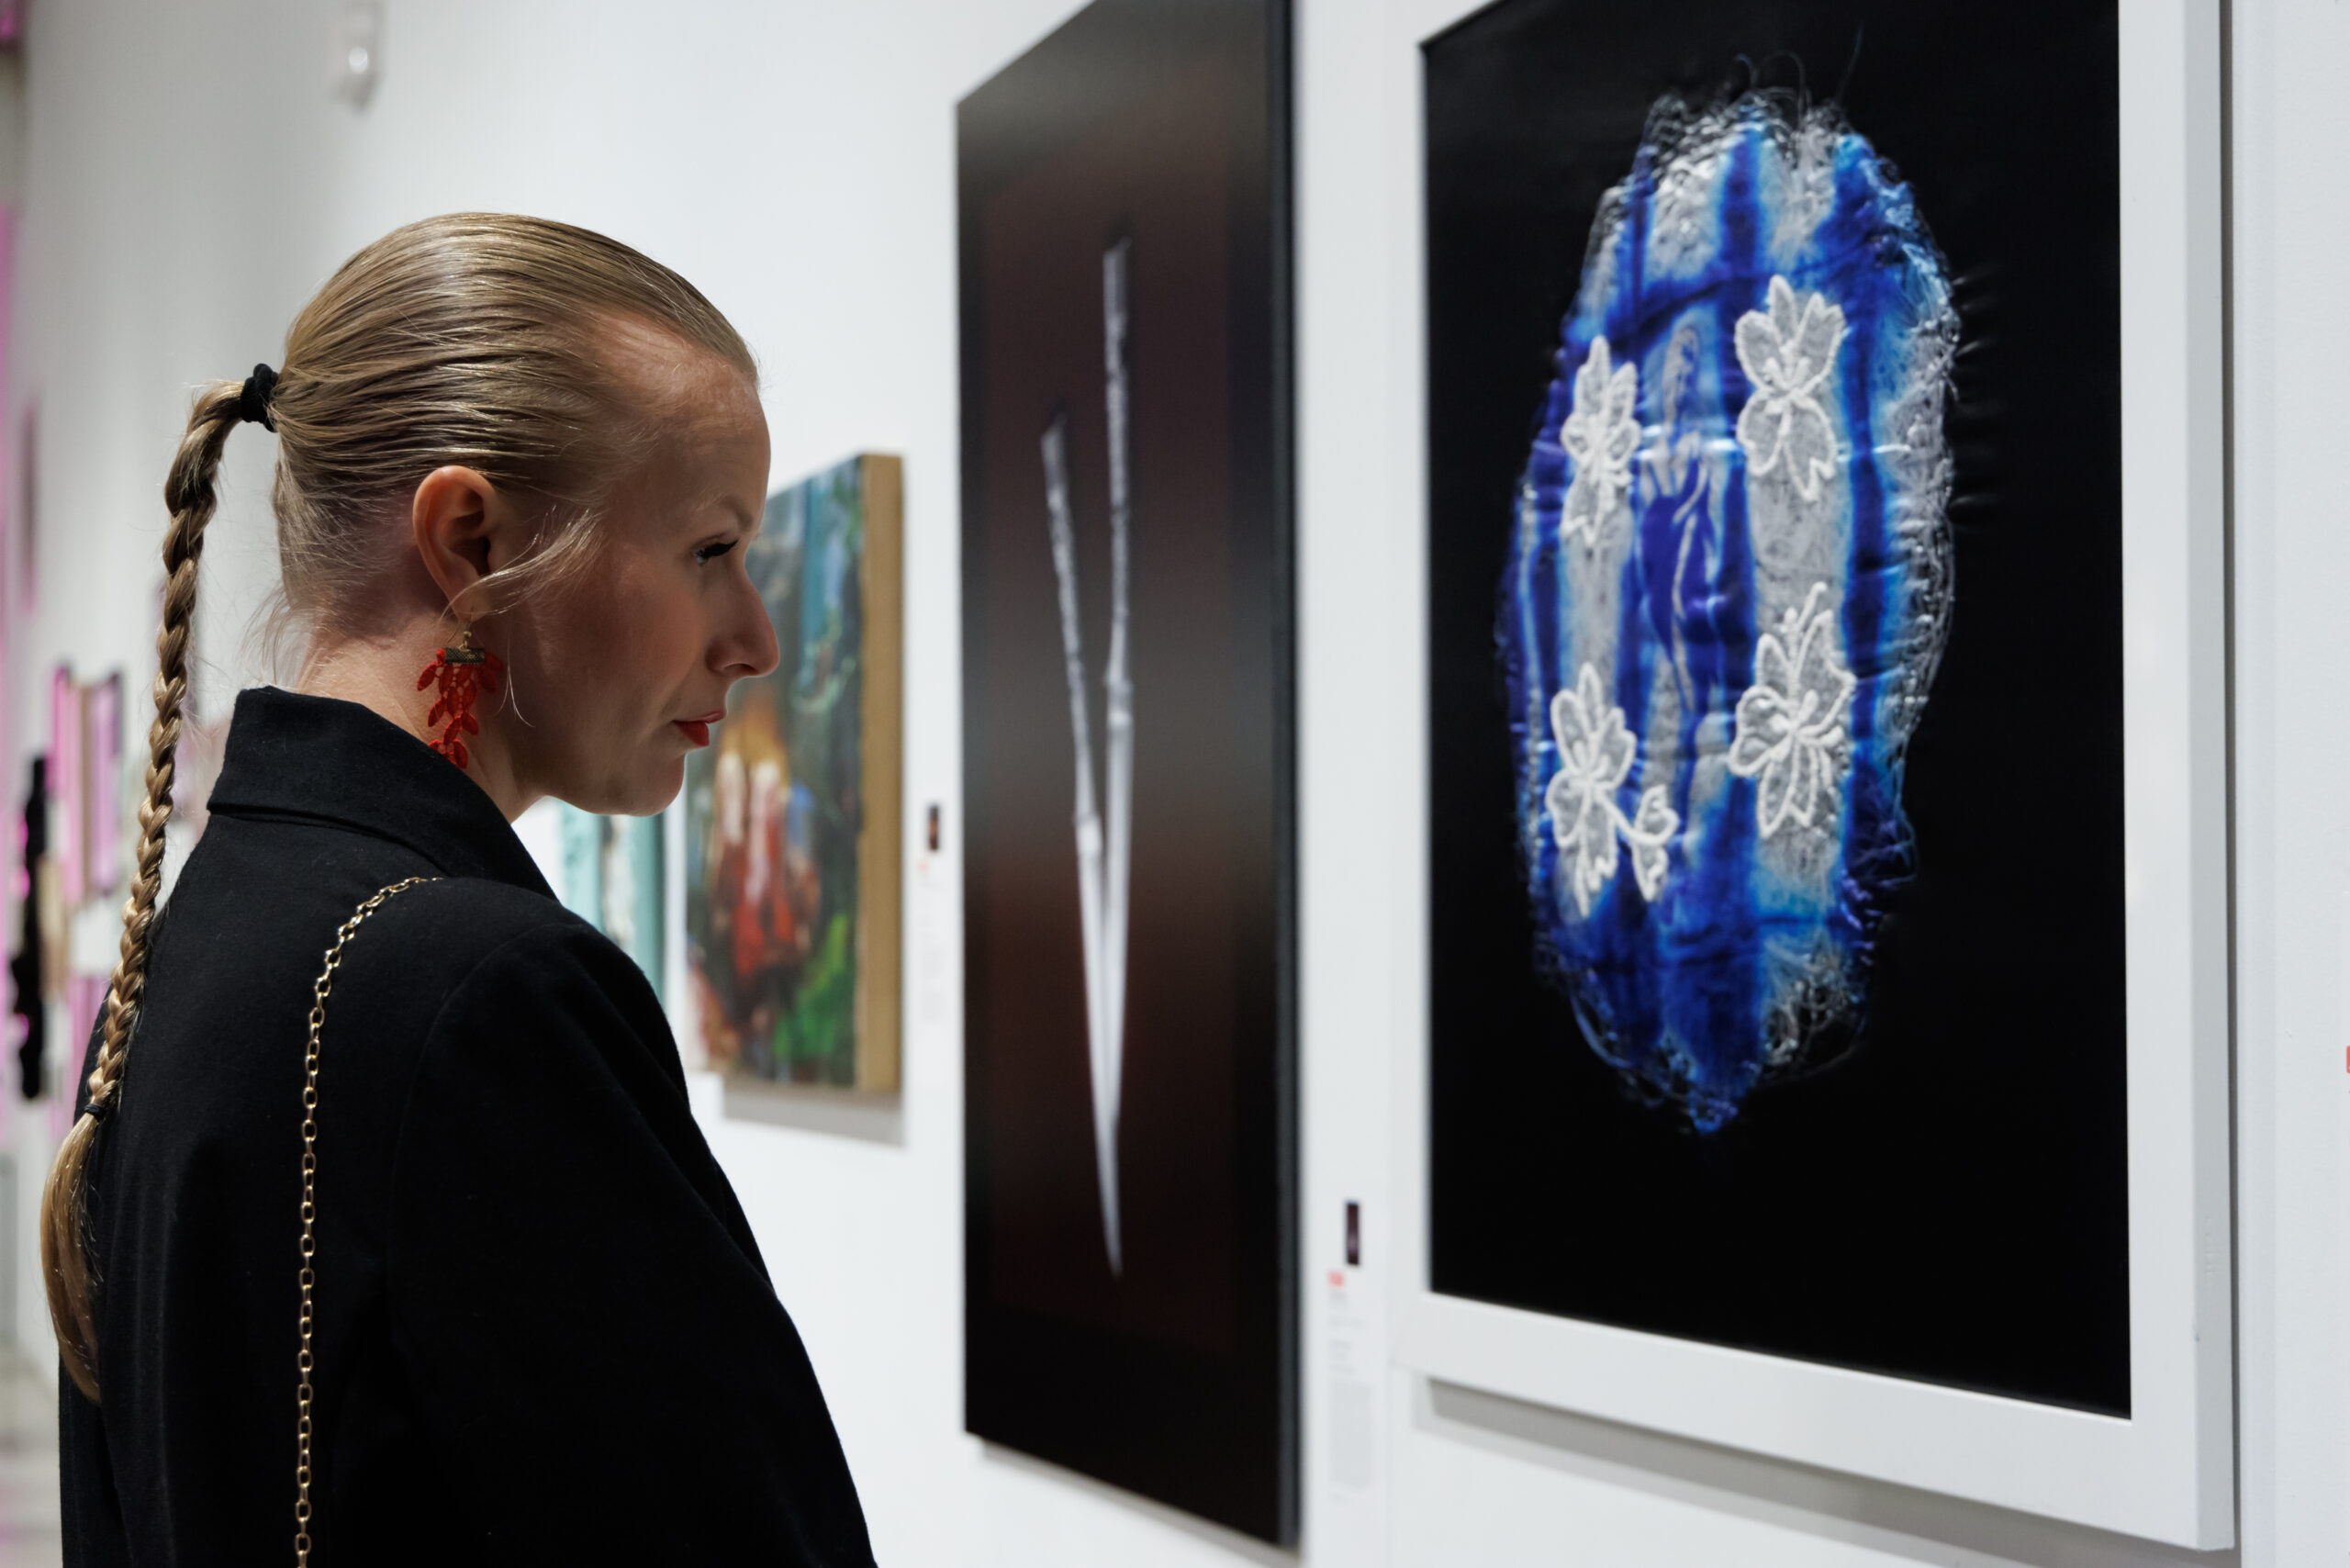 Image of a blond woman observing a black art piece with blue and white details.